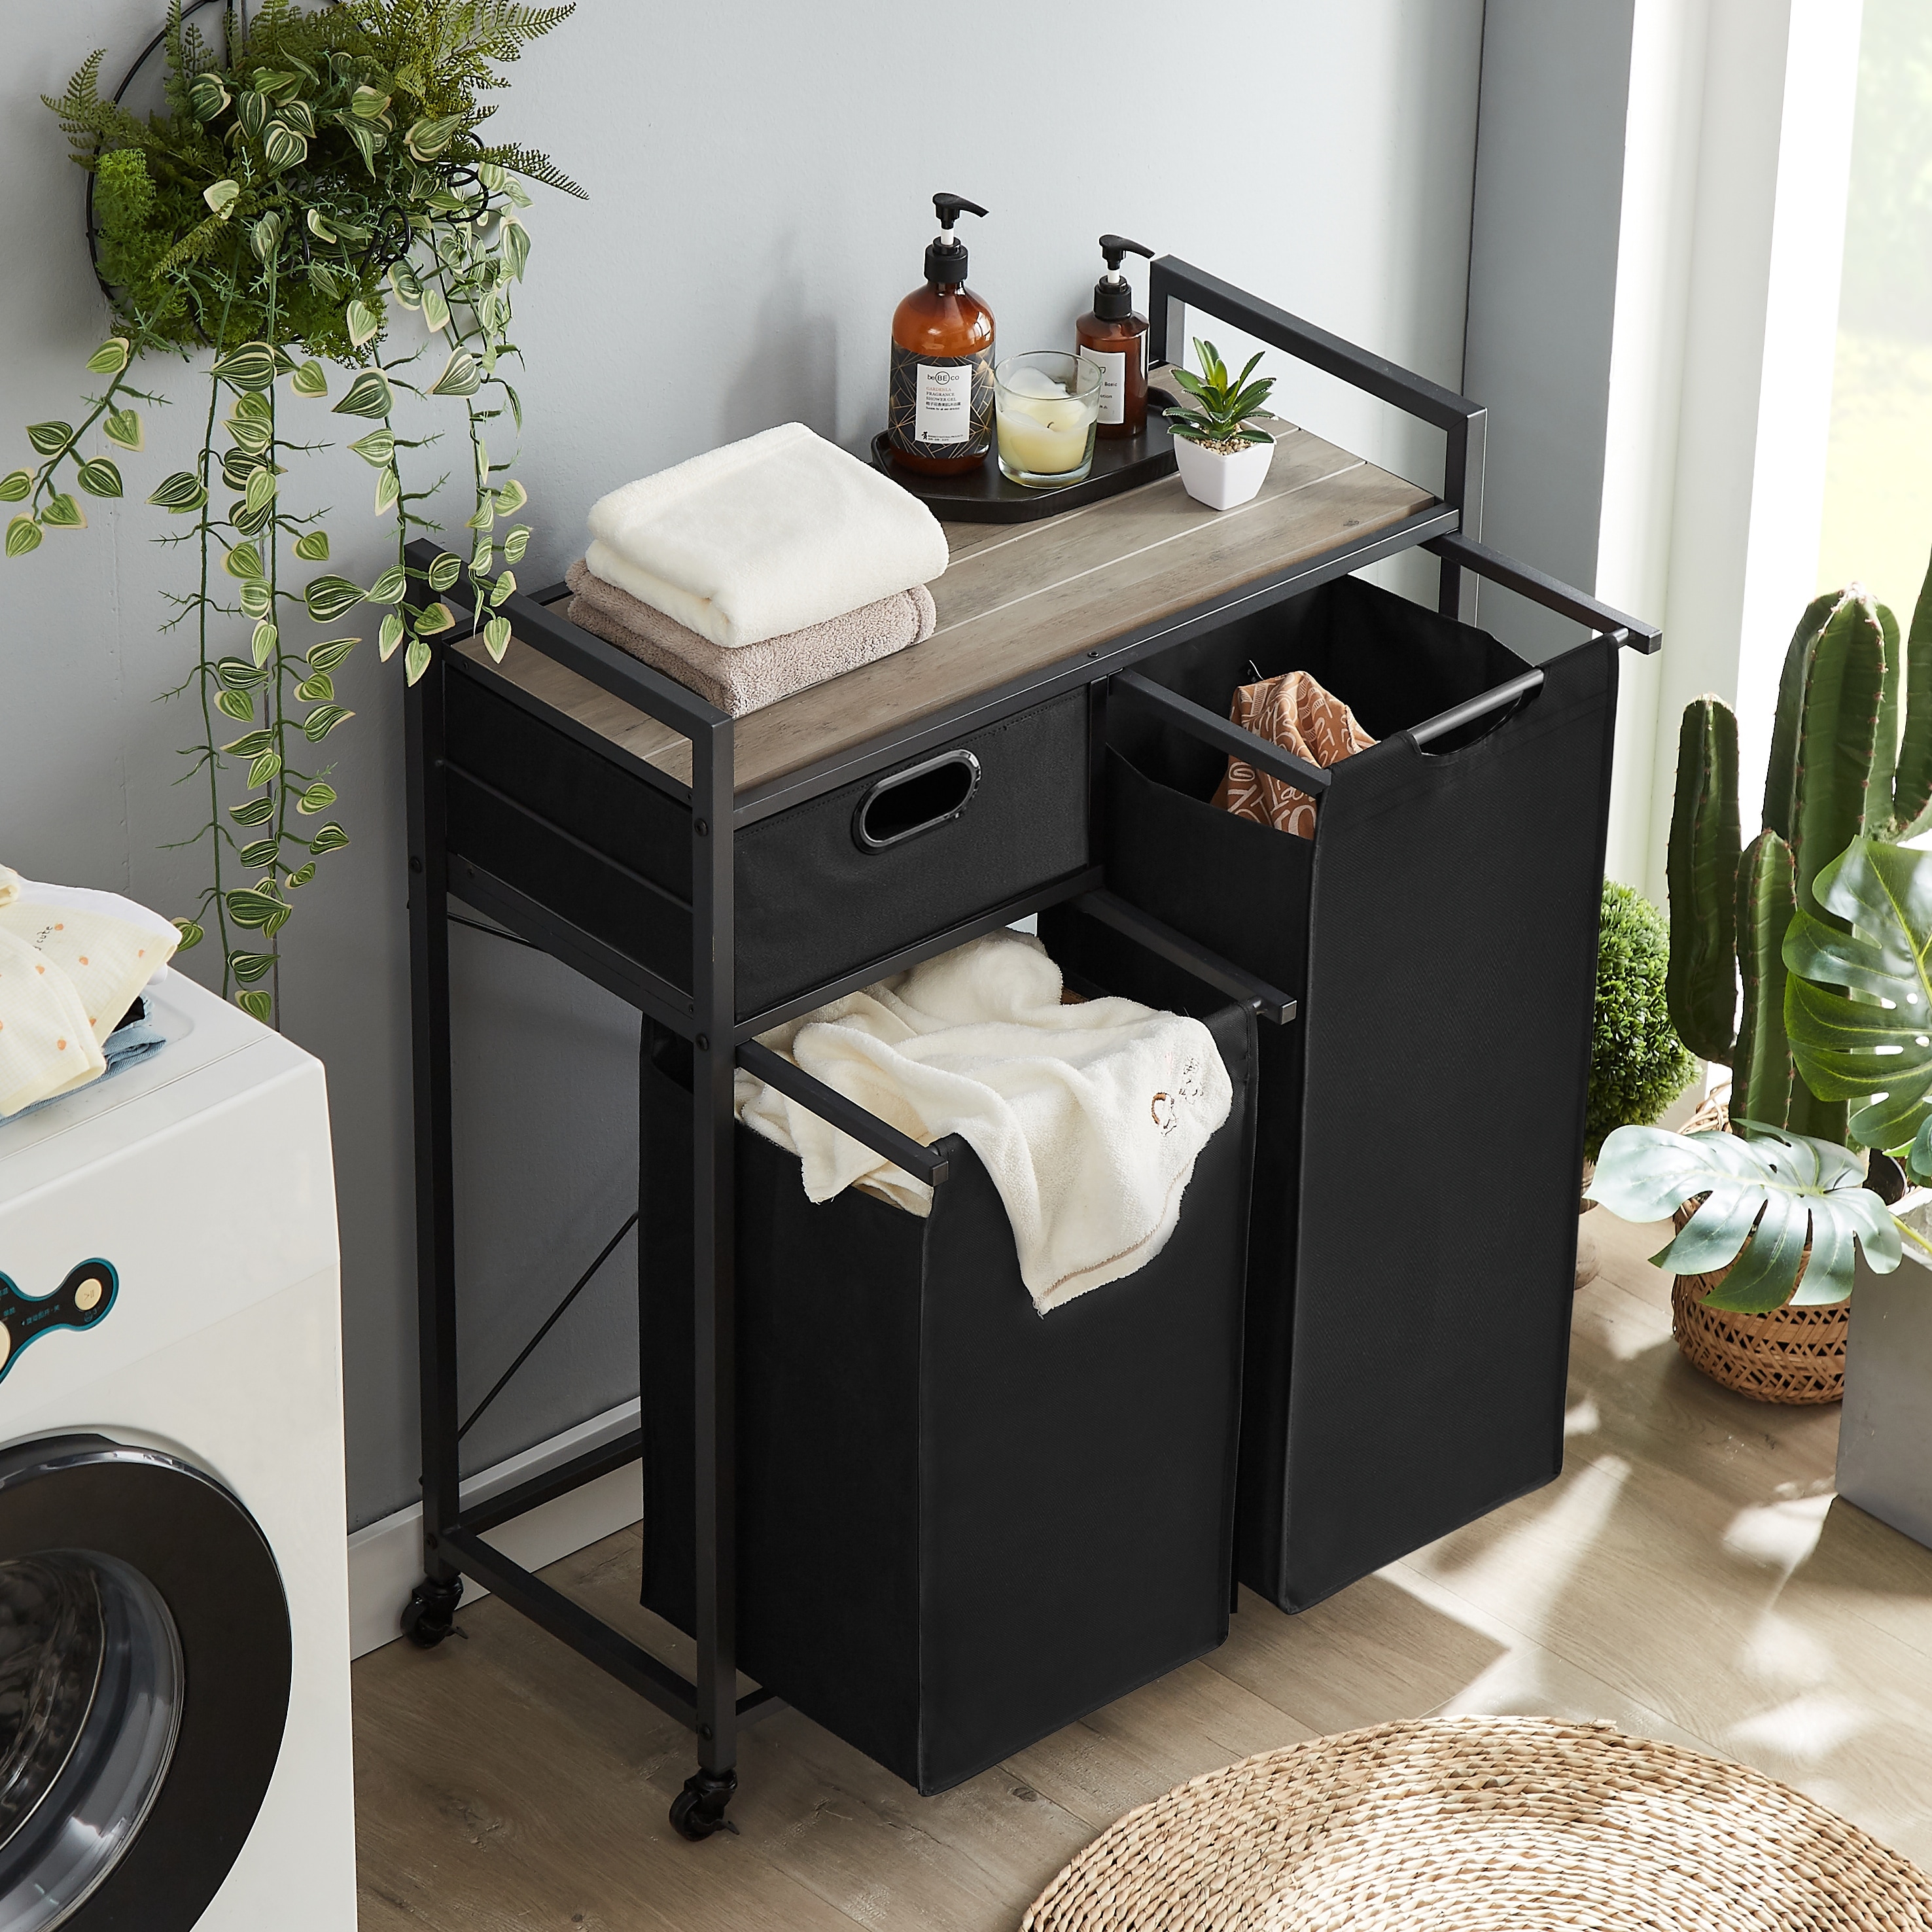 https://ak1.ostkcdn.com/images/products/is/images/direct/7cc8dd78e8601a4df73f08e7e29a9609607aa1c0/Laundry-Basket%2C-Laundry-Hamper-with-Drawer%2C-2-Laundry-Sorter%2C-with-2-Bags%2C-1-Storage-Rack.jpg